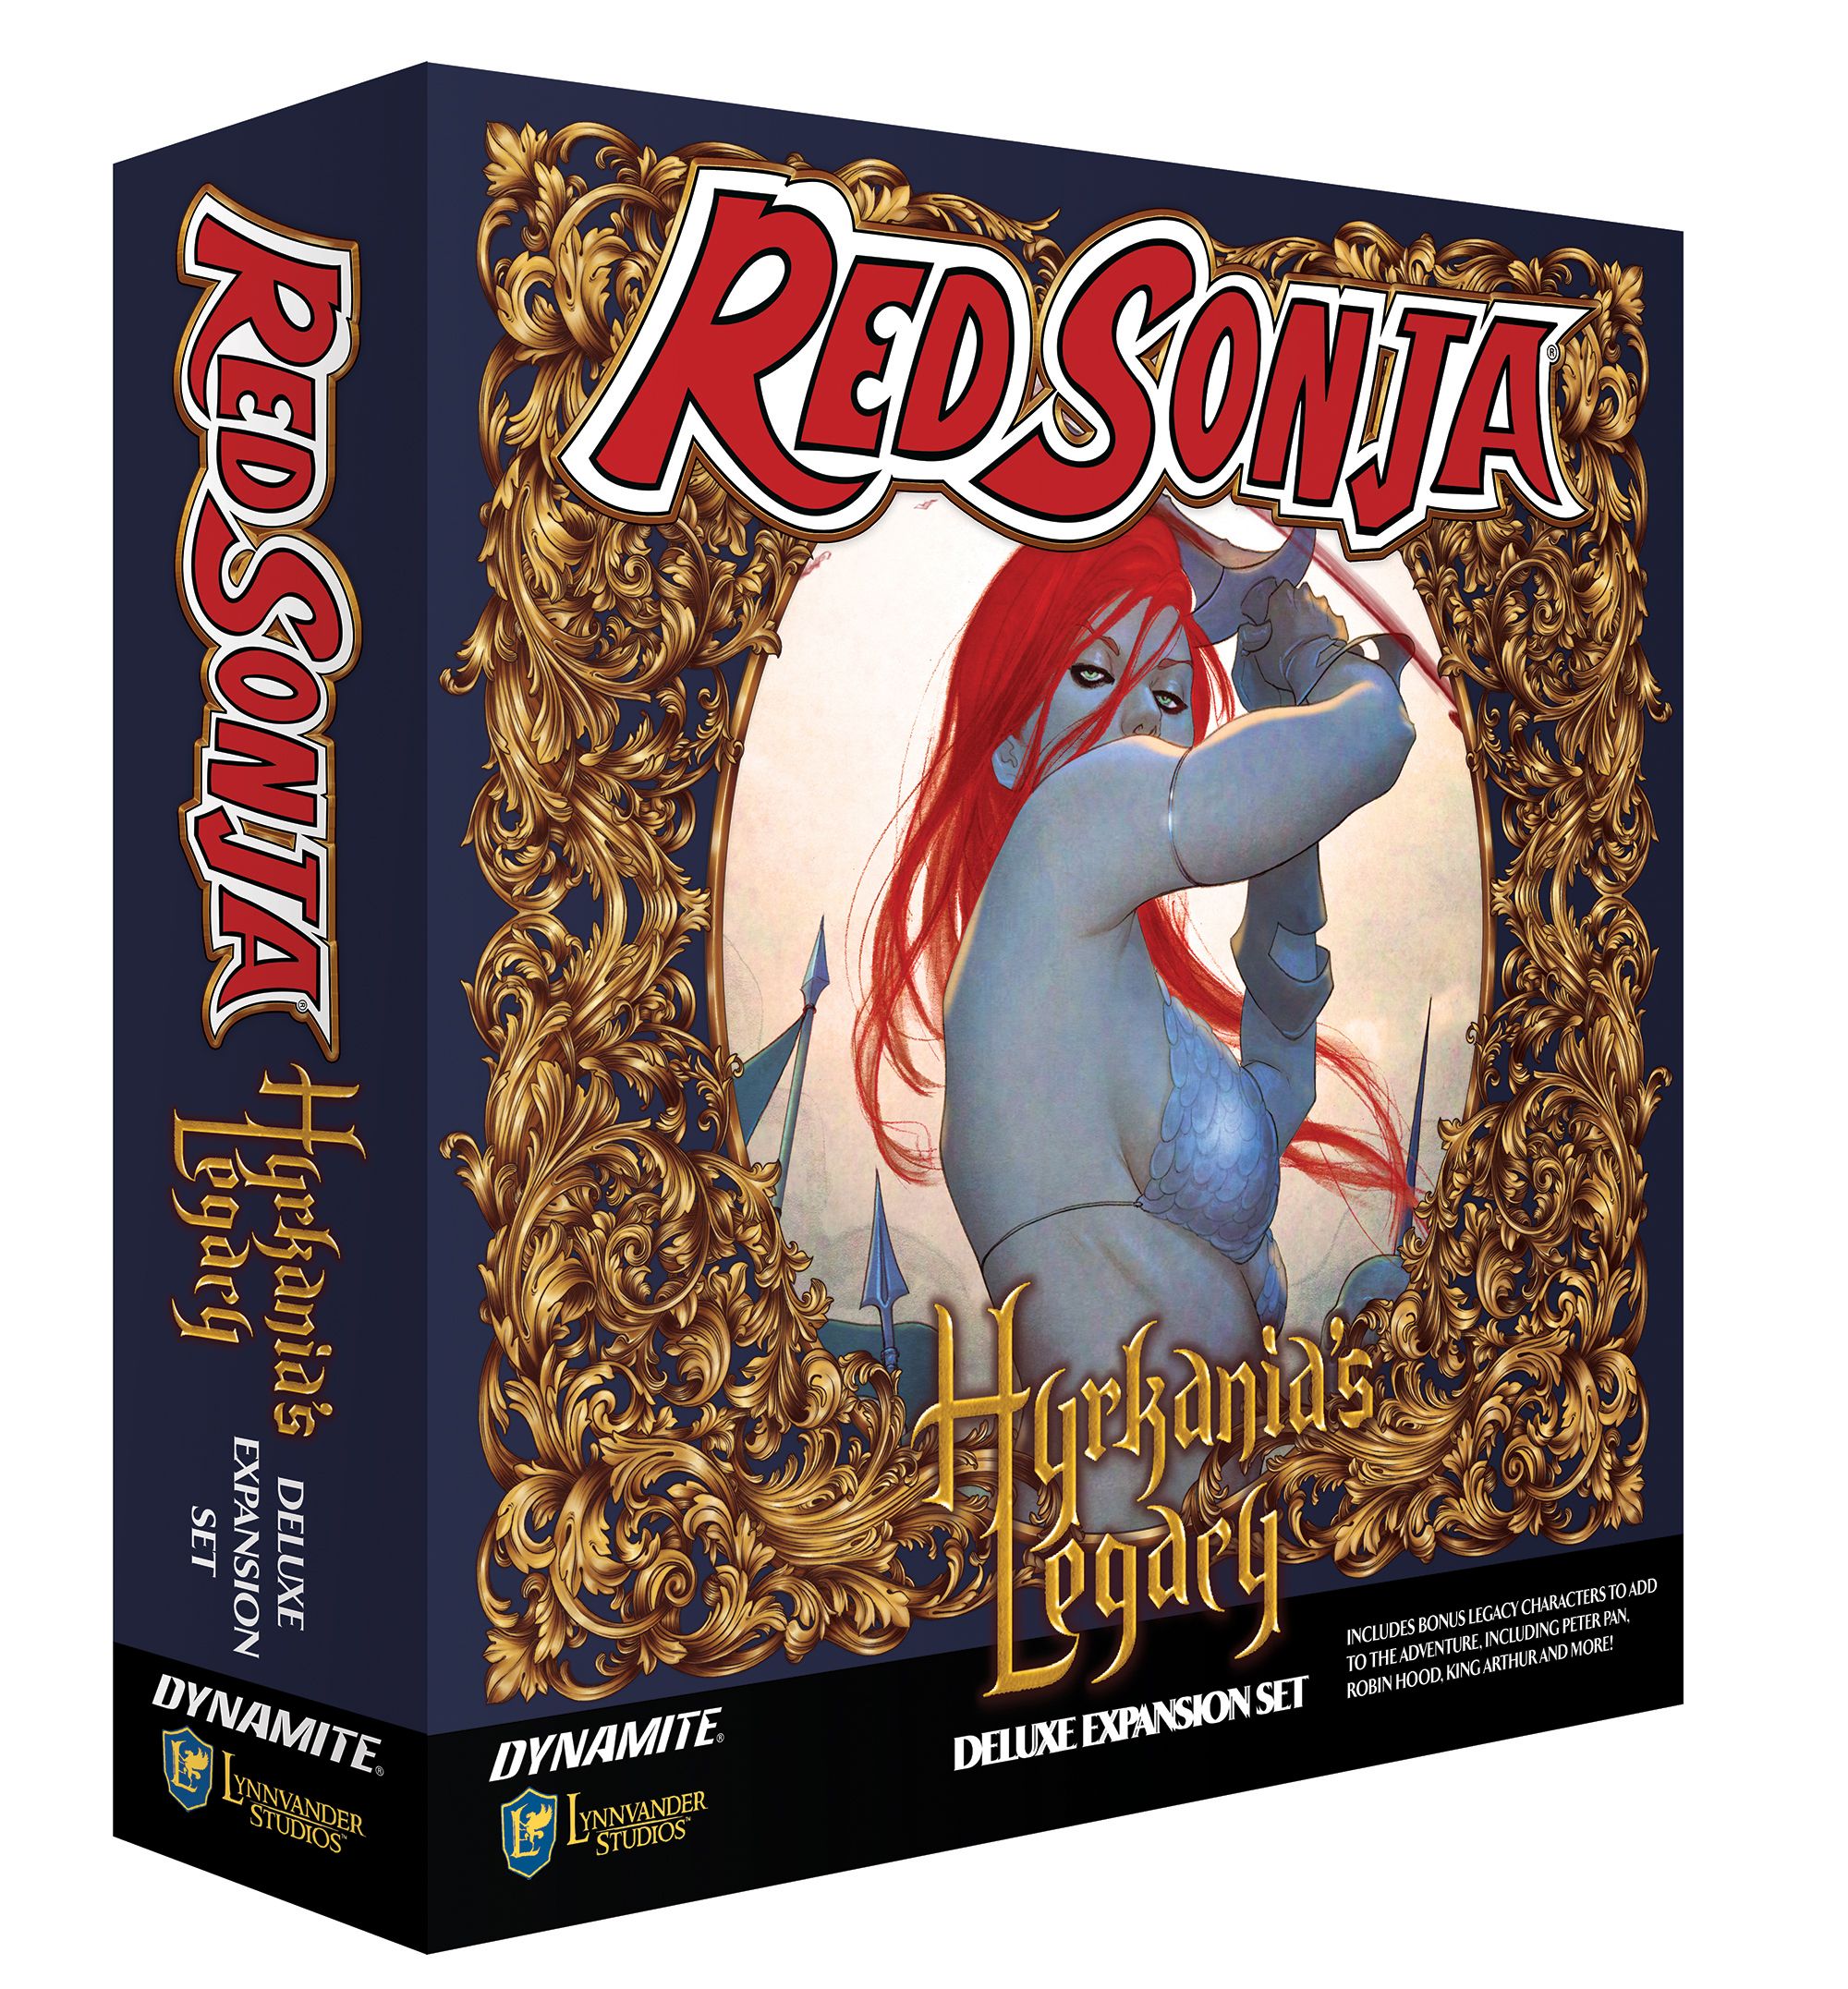 Red Sonja: Deluxe Expansion Set